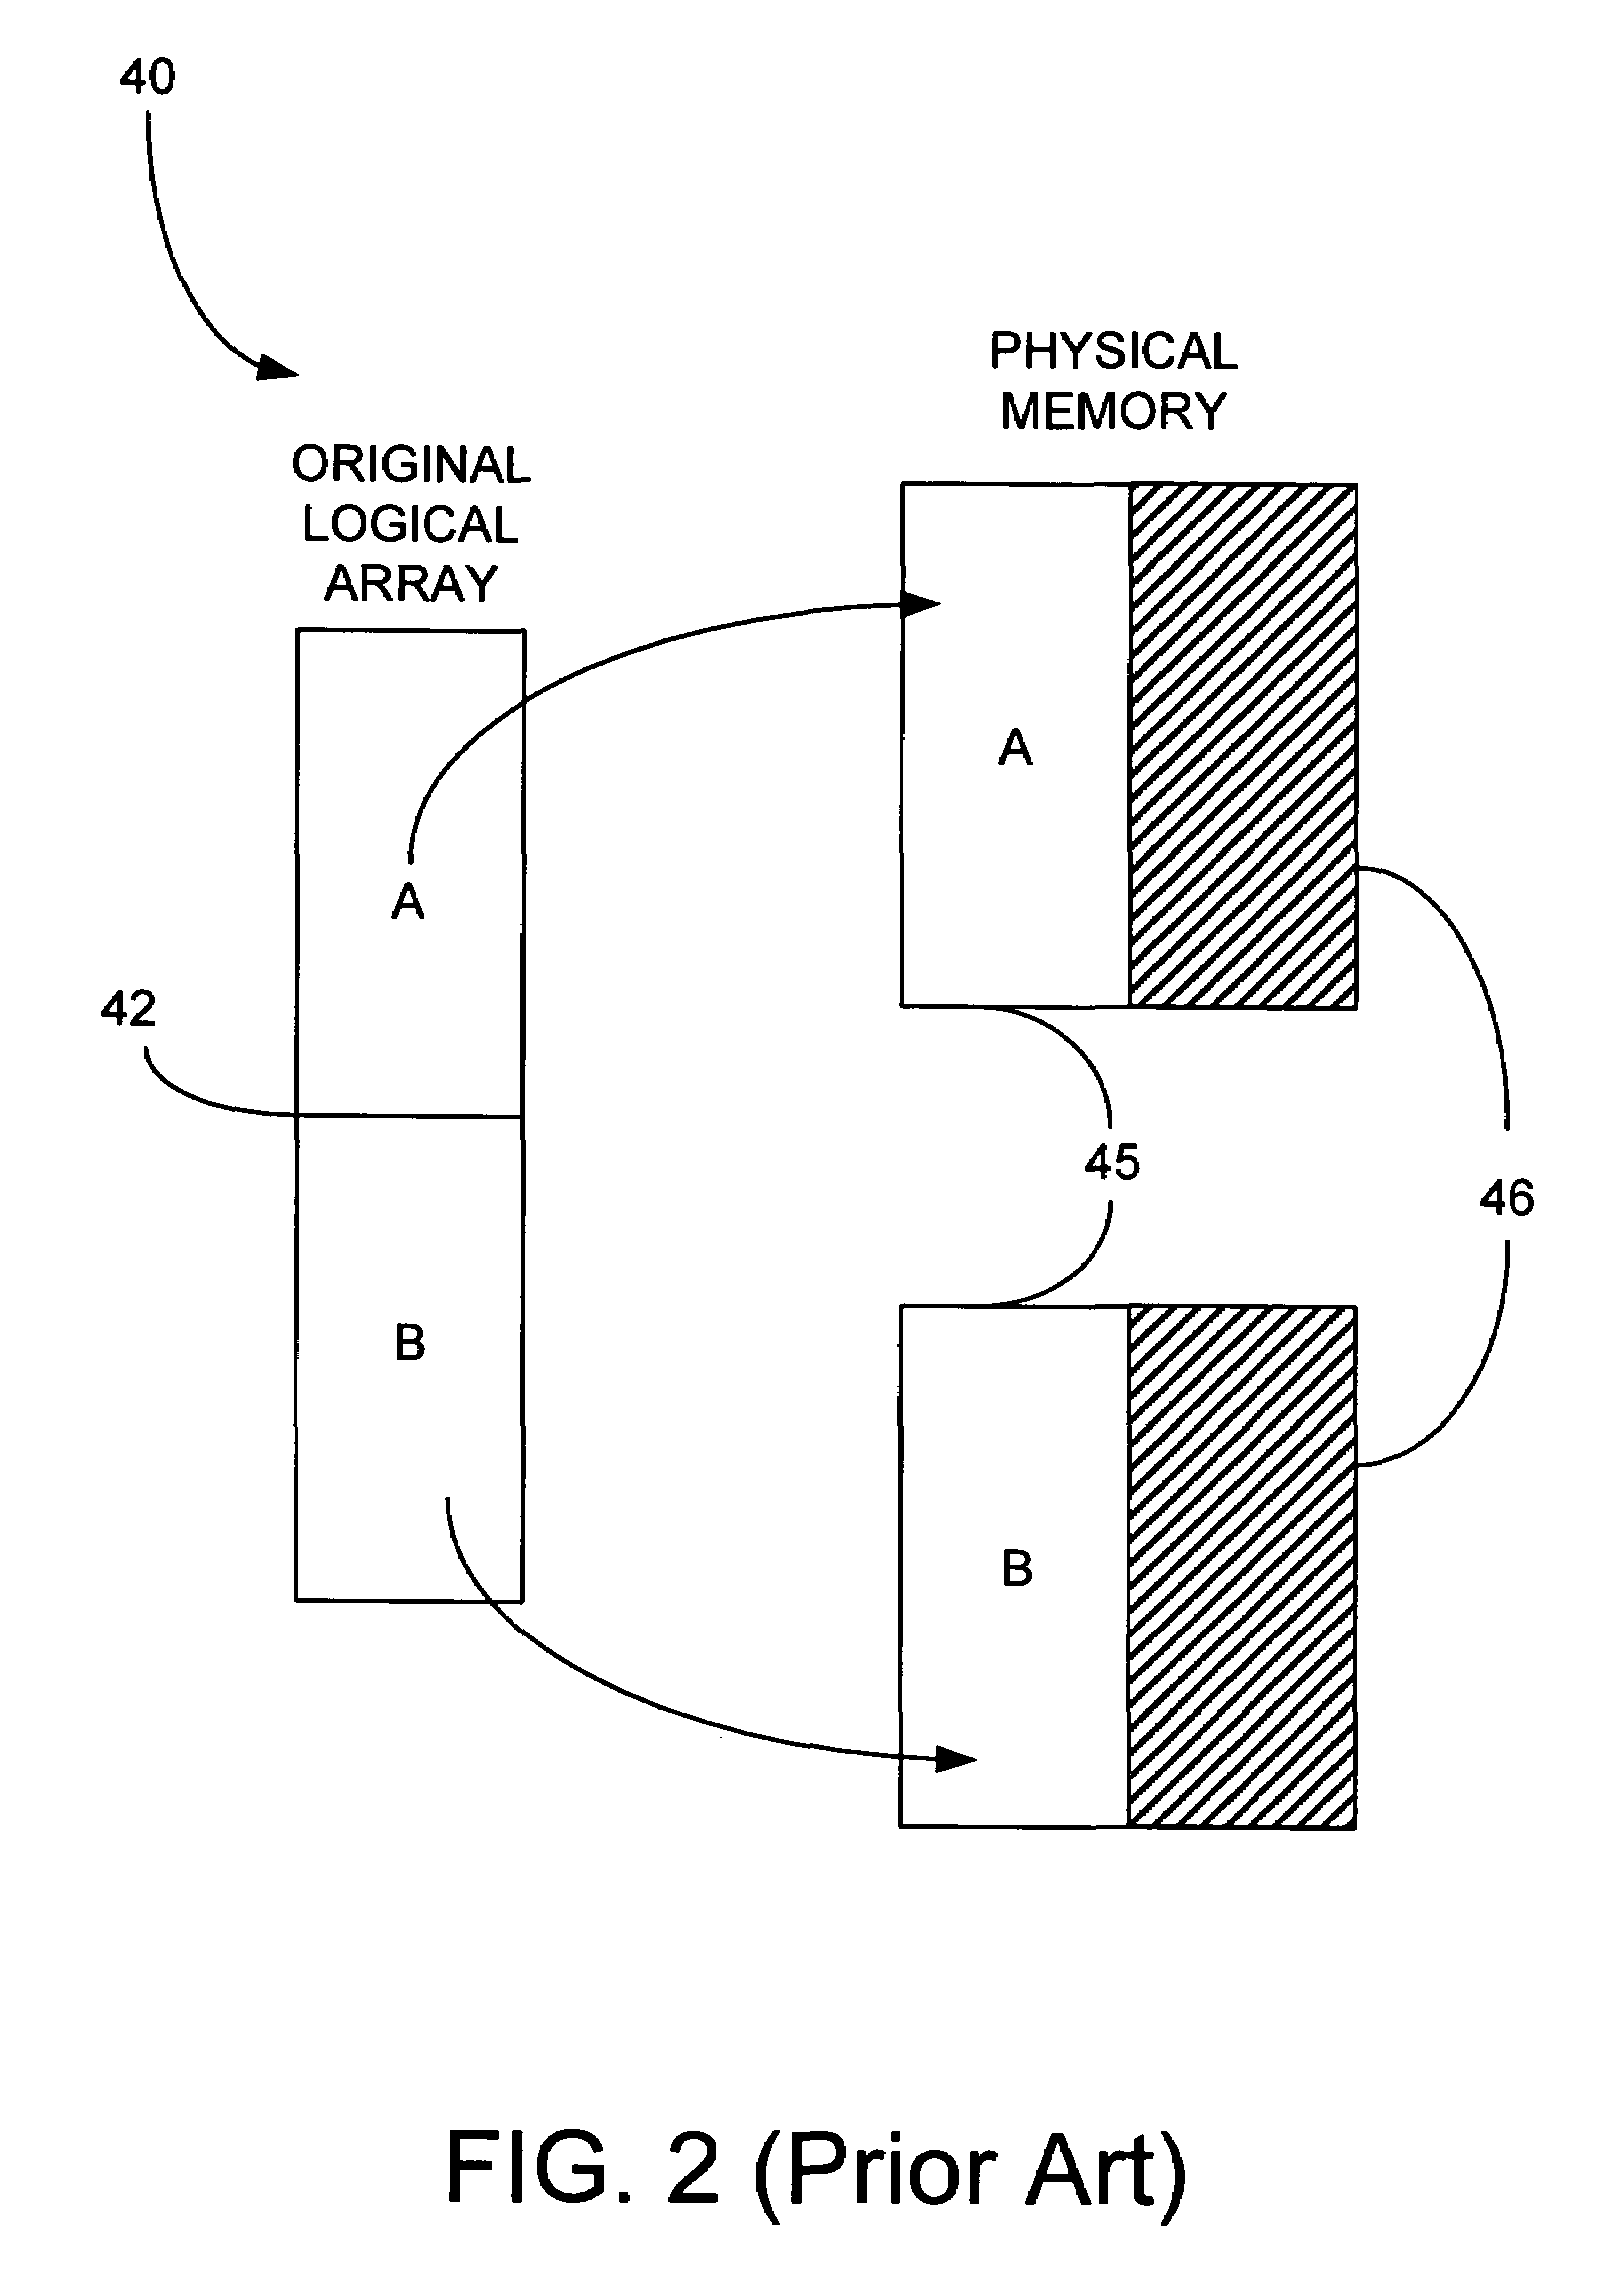 Method and apparatus to increase the usable memory capacity of a logic simulation hardware emulator/accelerator